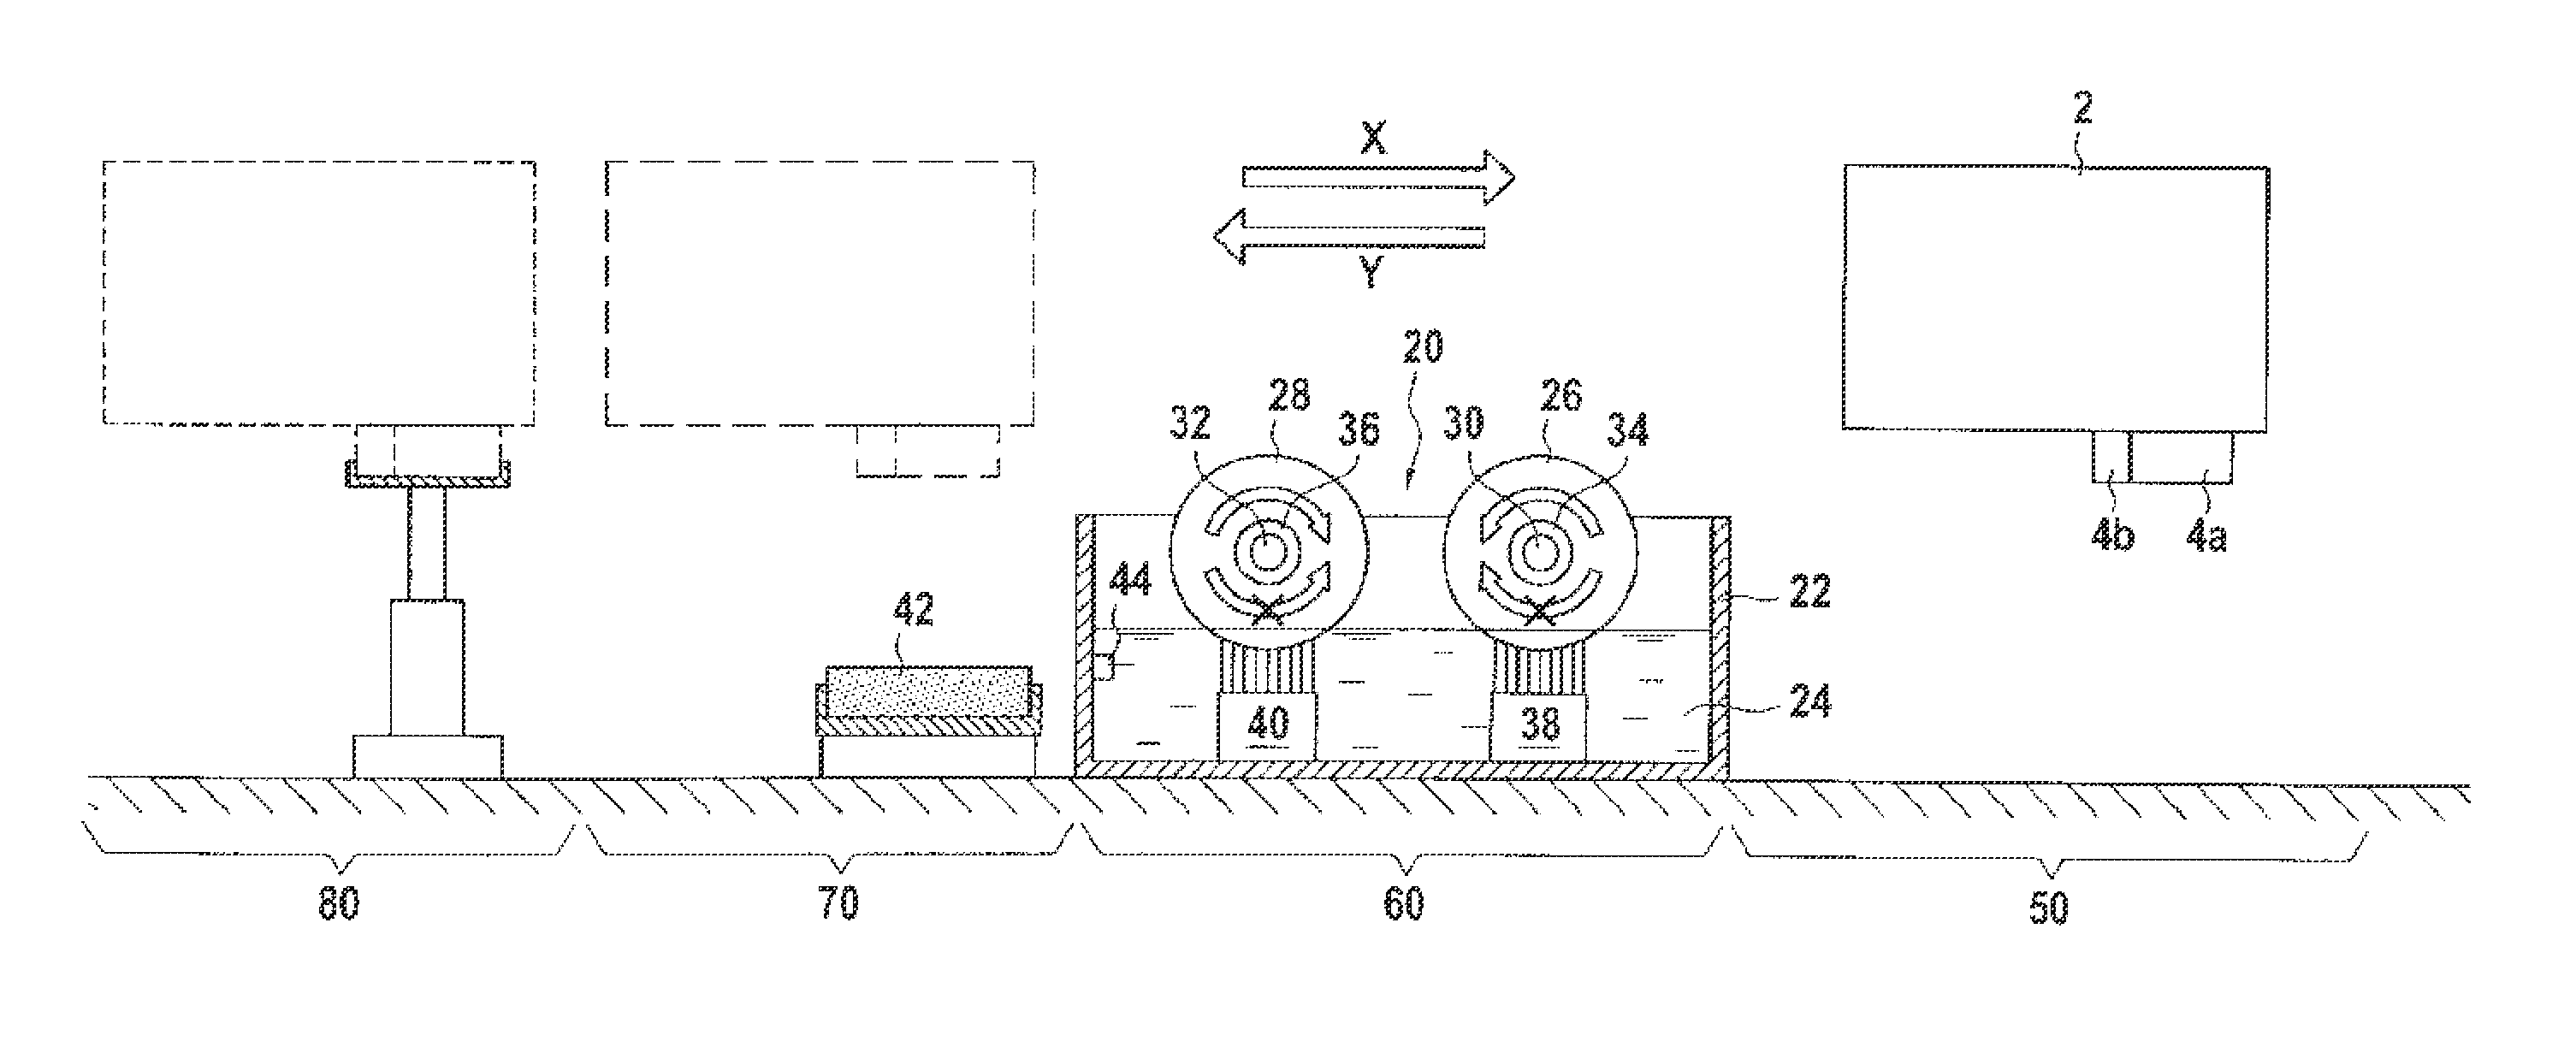 Wiping device for an ink jet franking machine